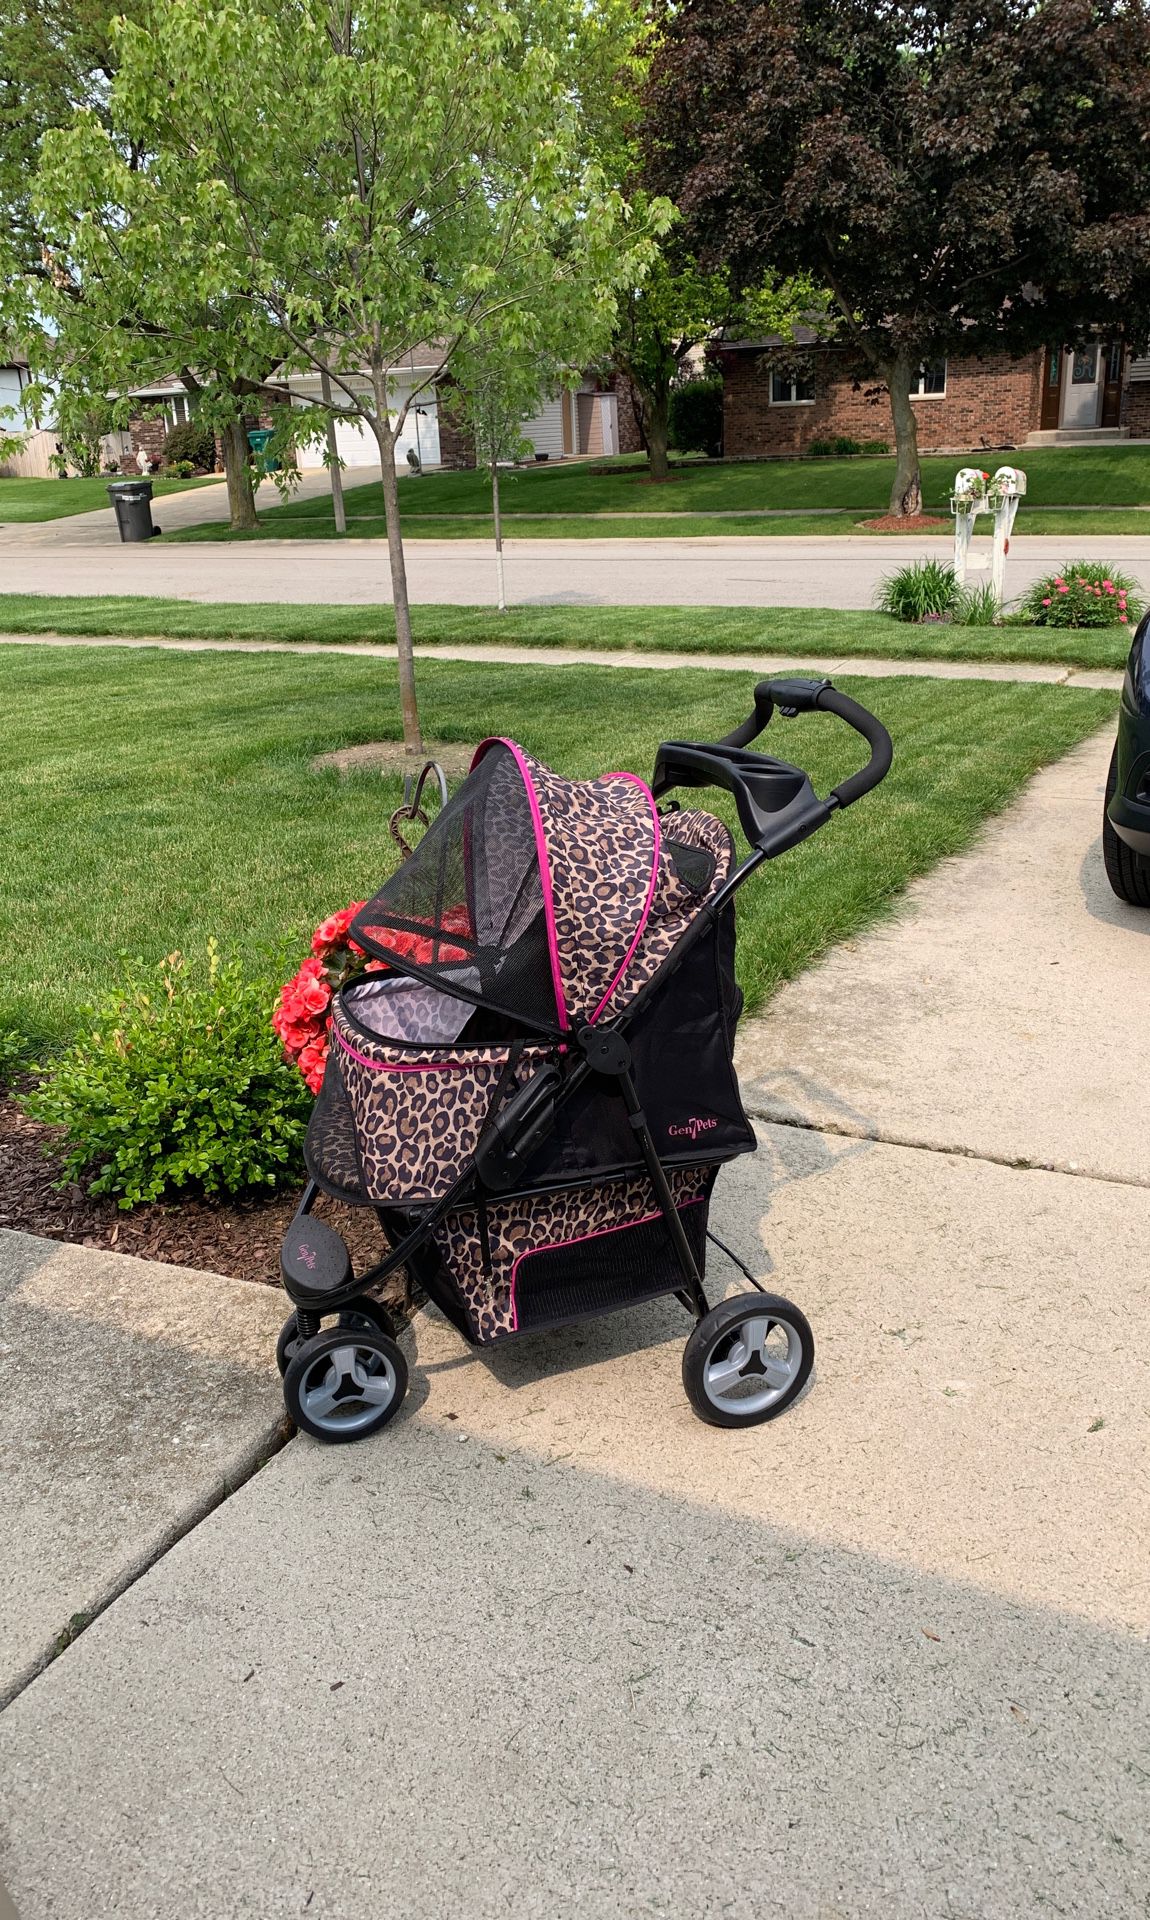 Gem7pets doggie stroller for small dog. Used only twice like brand new. $110